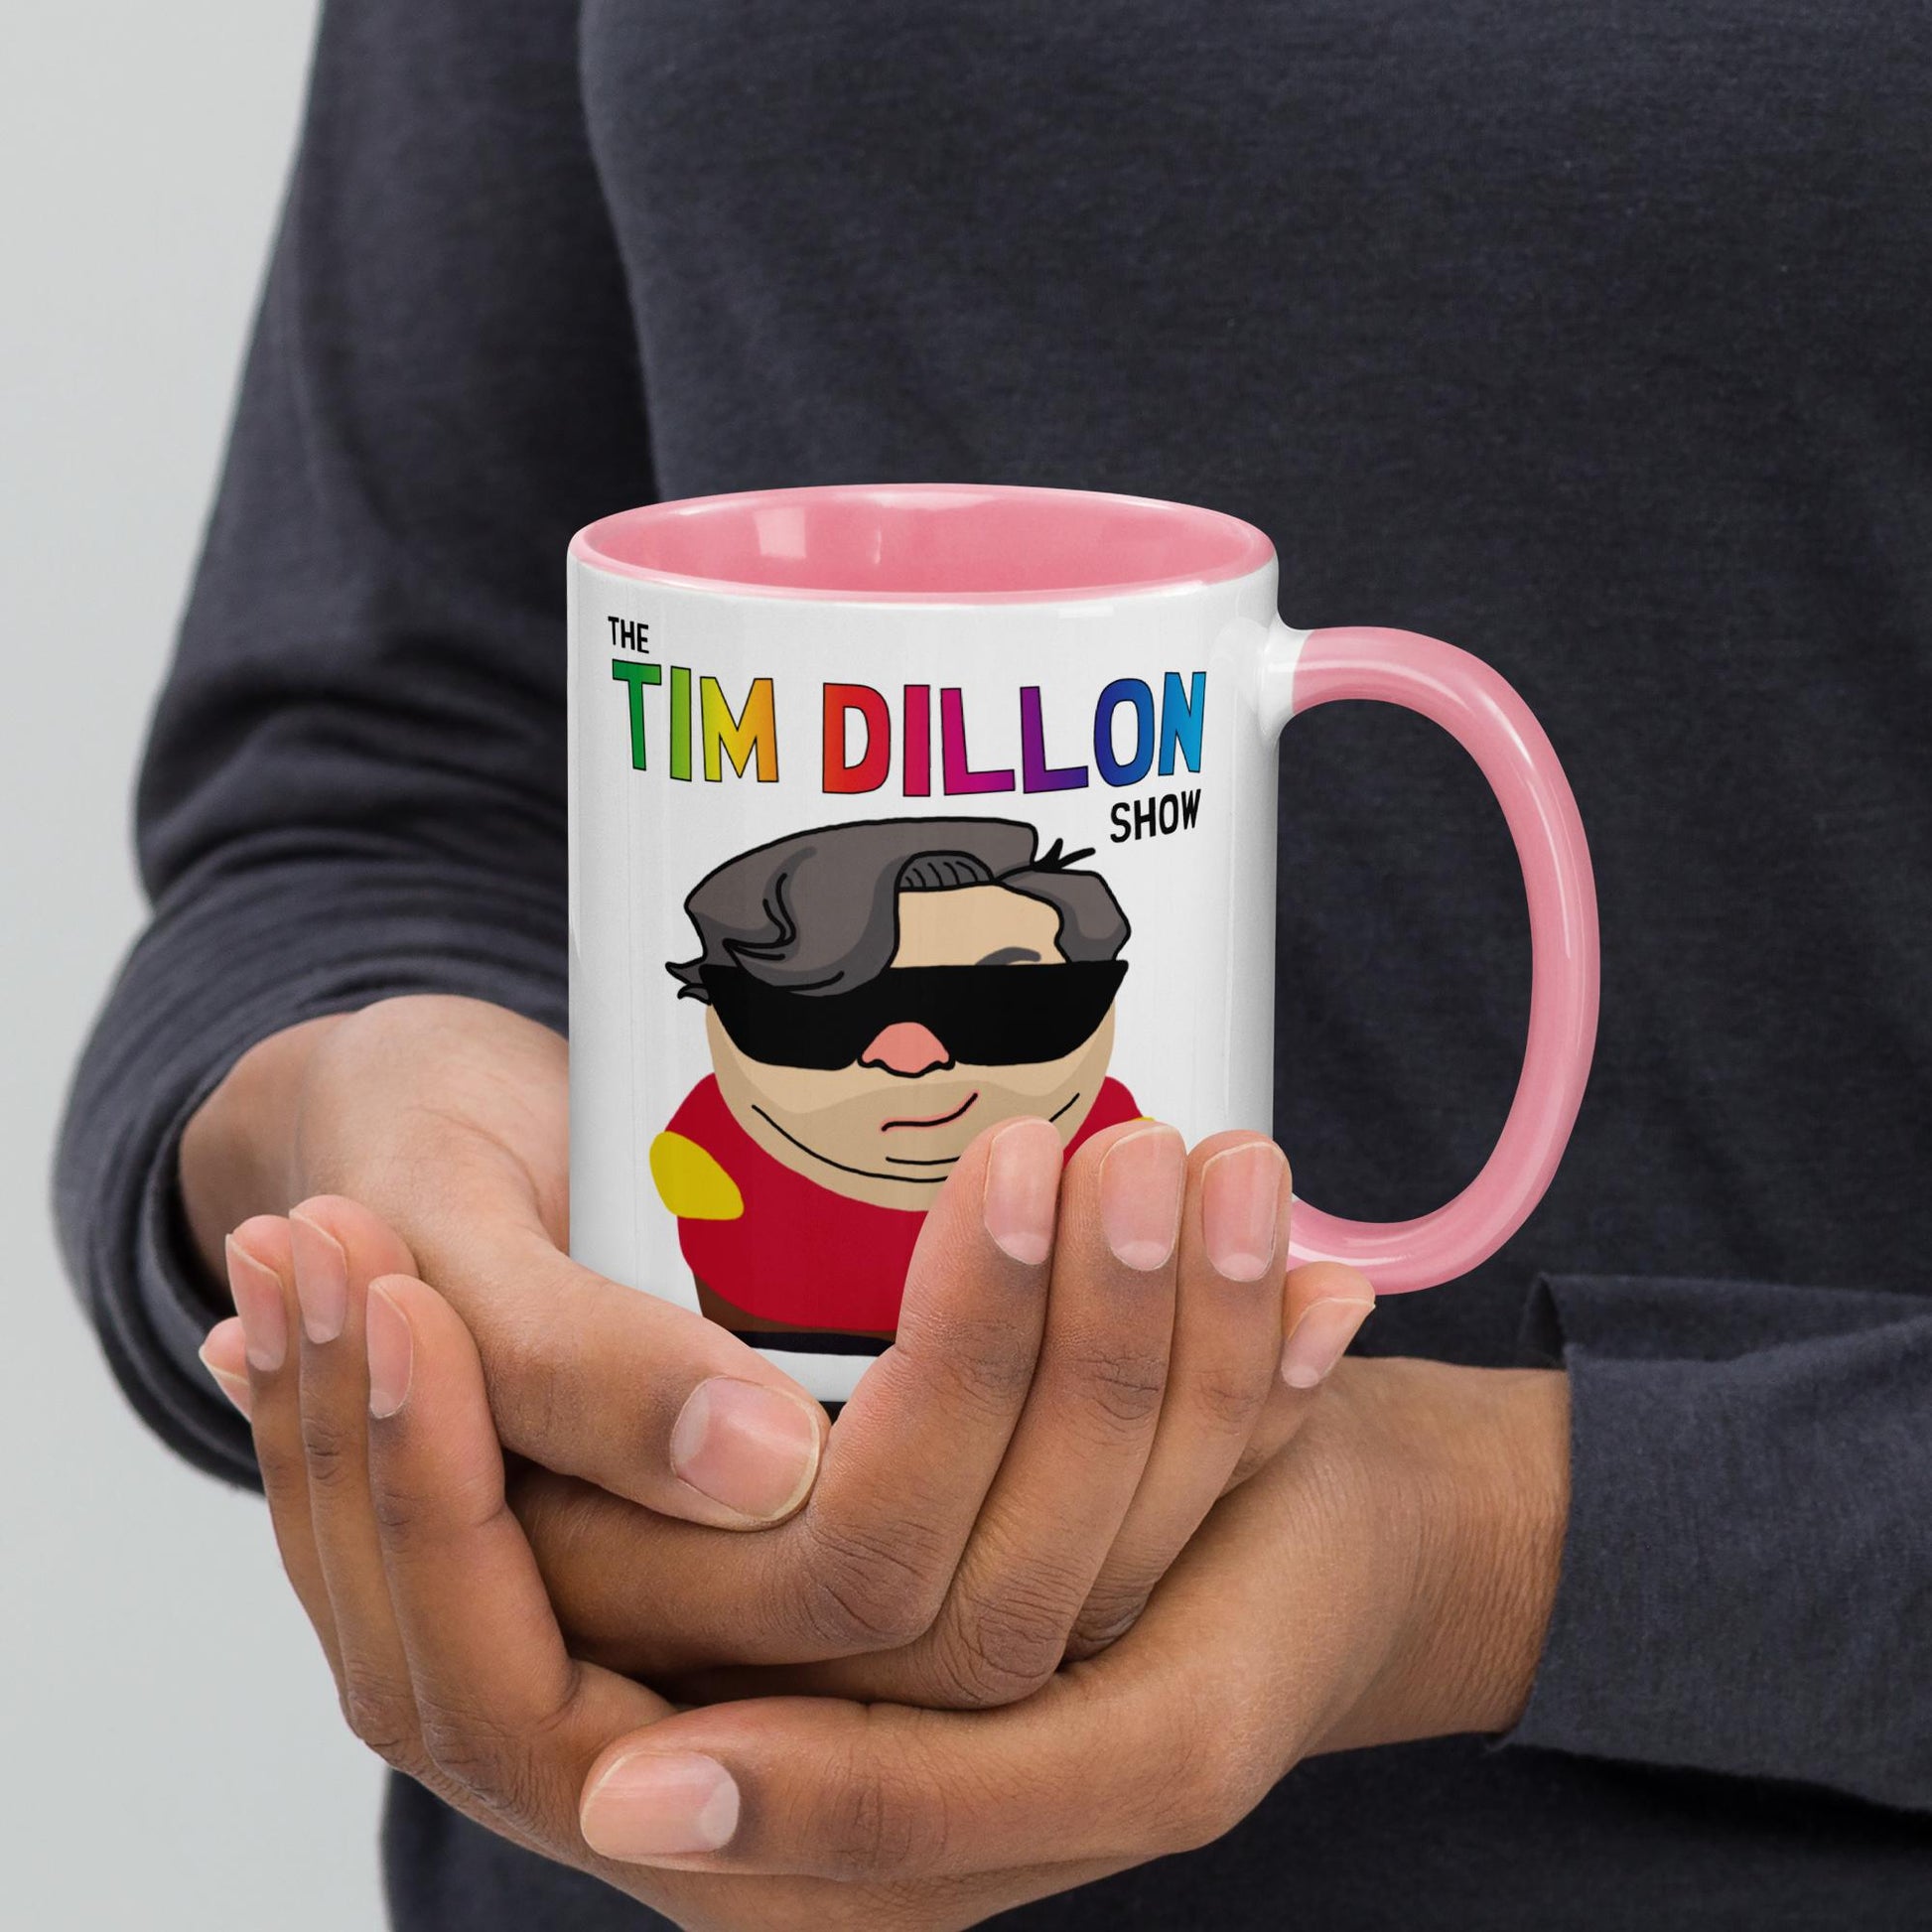 Tim Dillon Cartman, Southpark, The Tim Dillon Show, Tim Dillon Podcast, Tim Dillon Merch, Tim Dillon Mug with Color Inside Next Cult Brand Podcasts, Stand-up Comedy, Tim Dillon